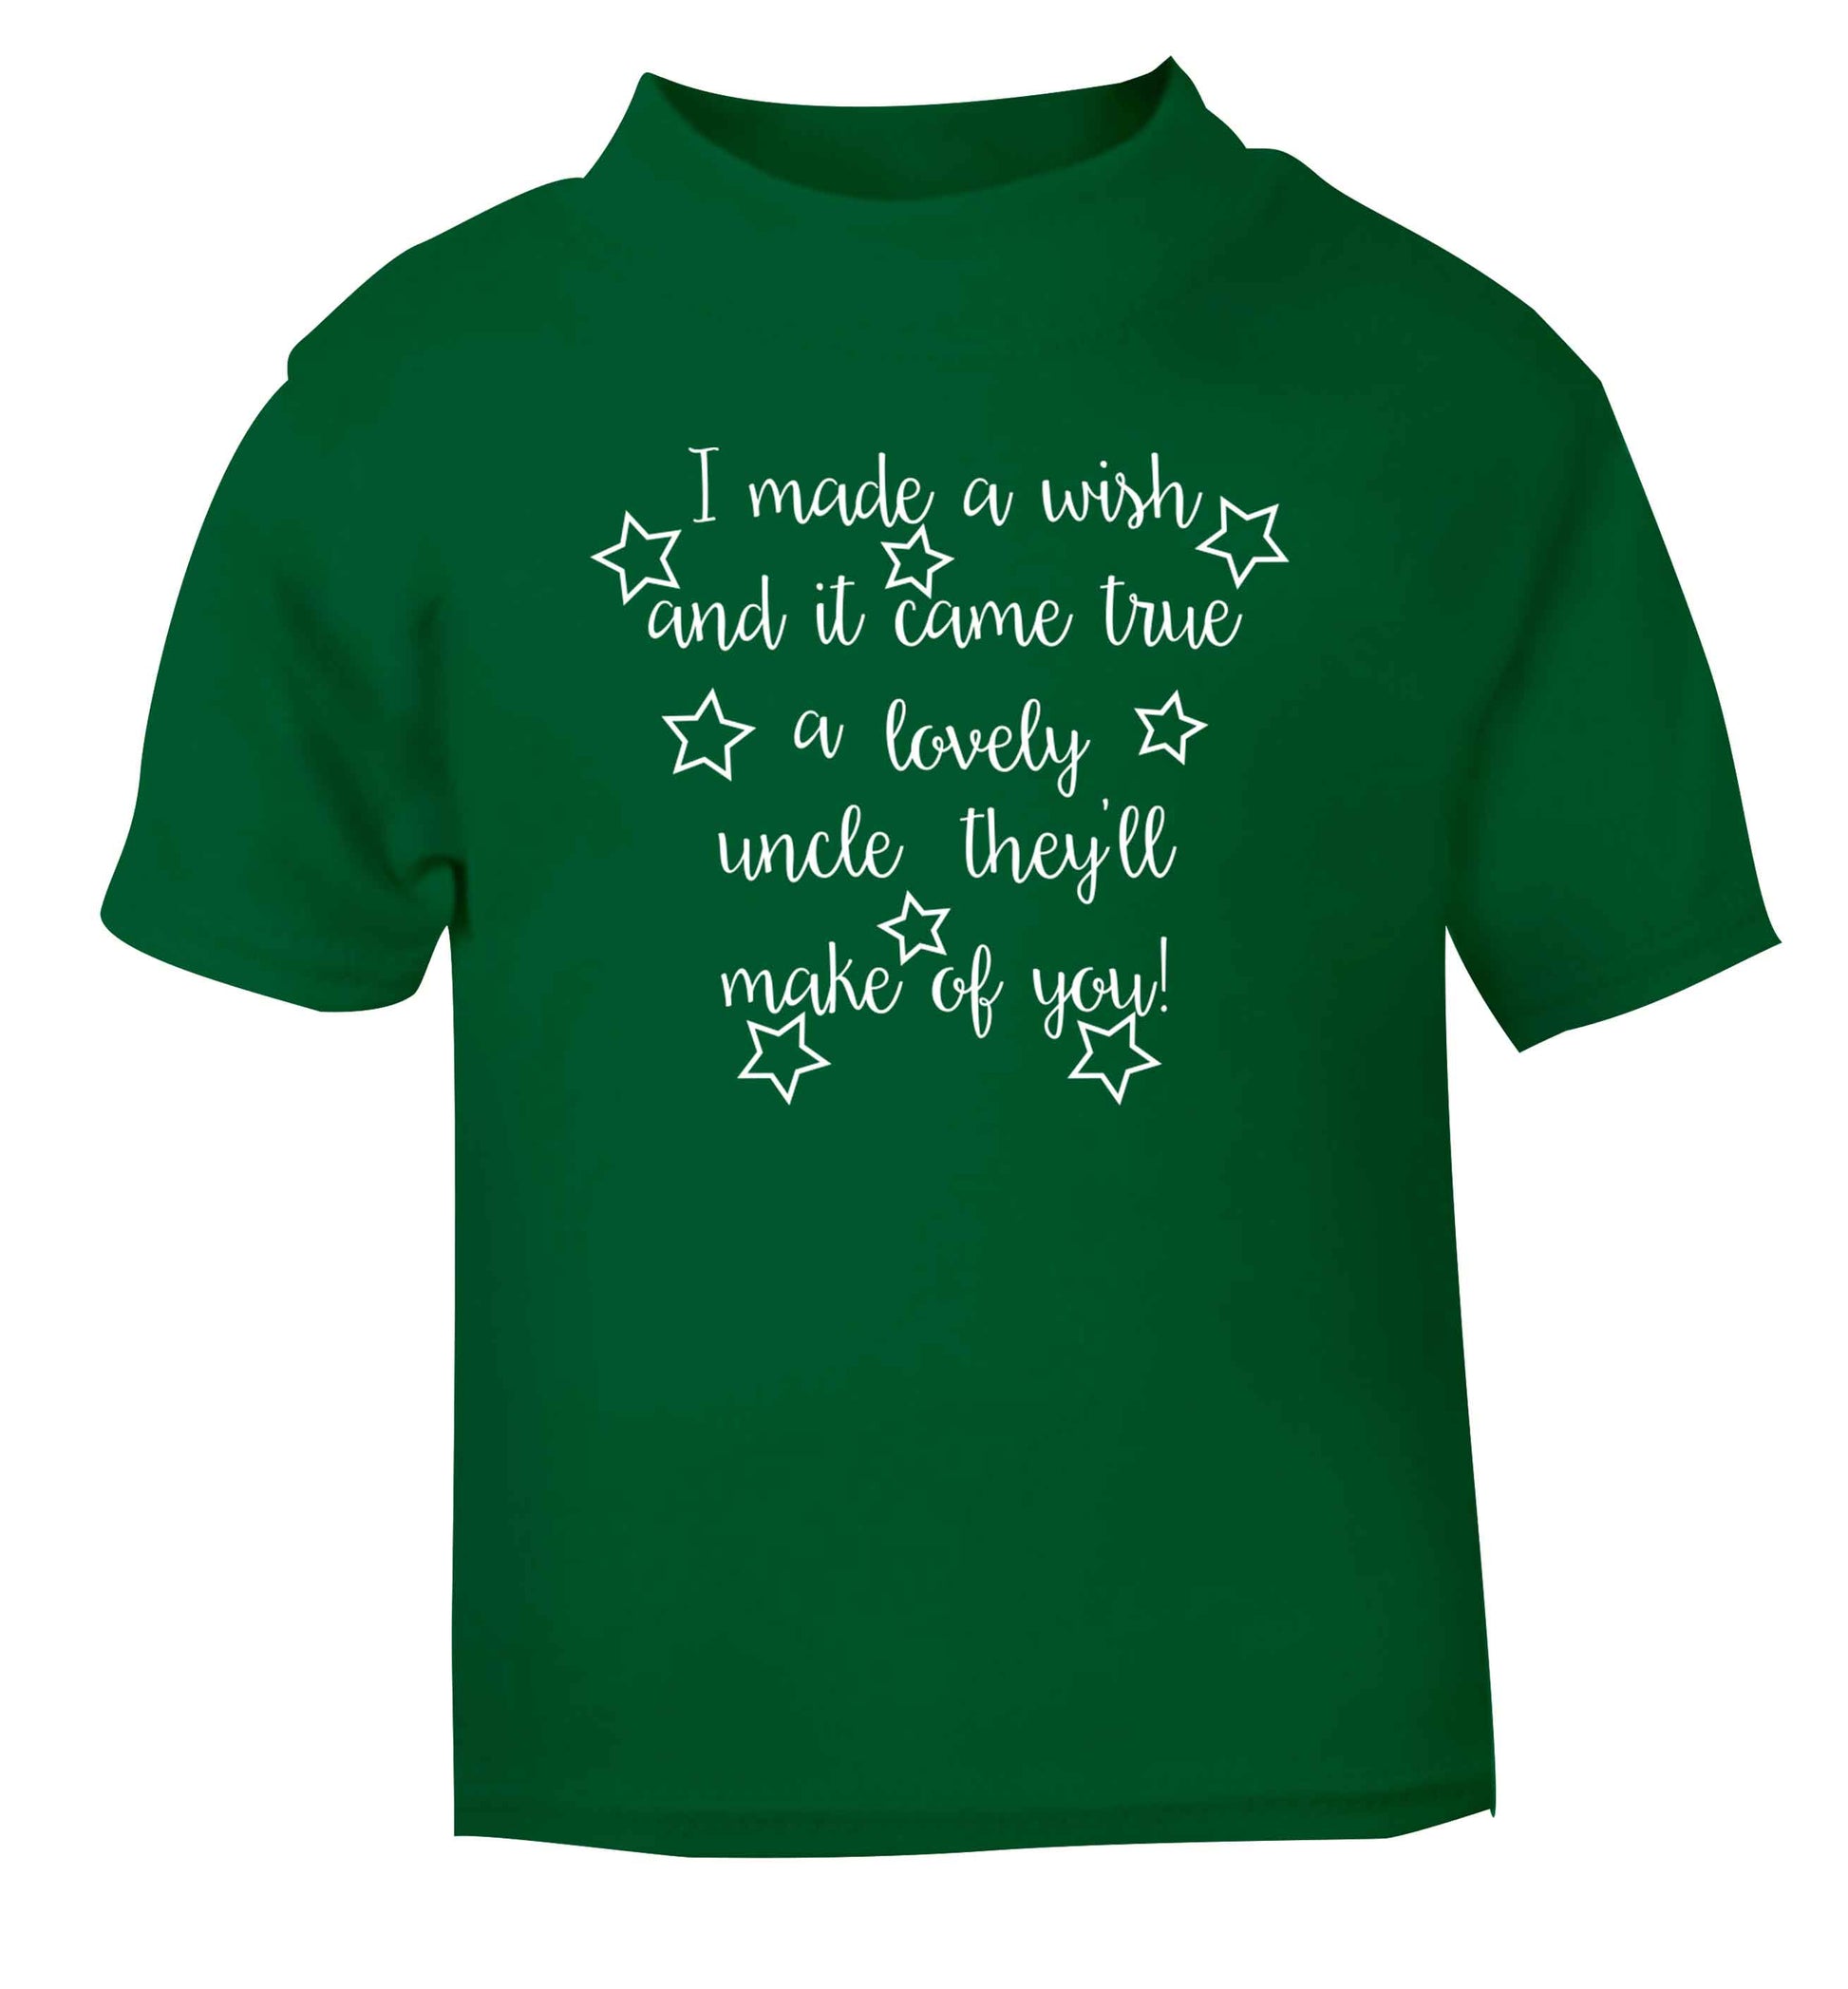 I made a wish and it came true a lovely uncle they'll make of you! green Baby Toddler Tshirt 2 Years